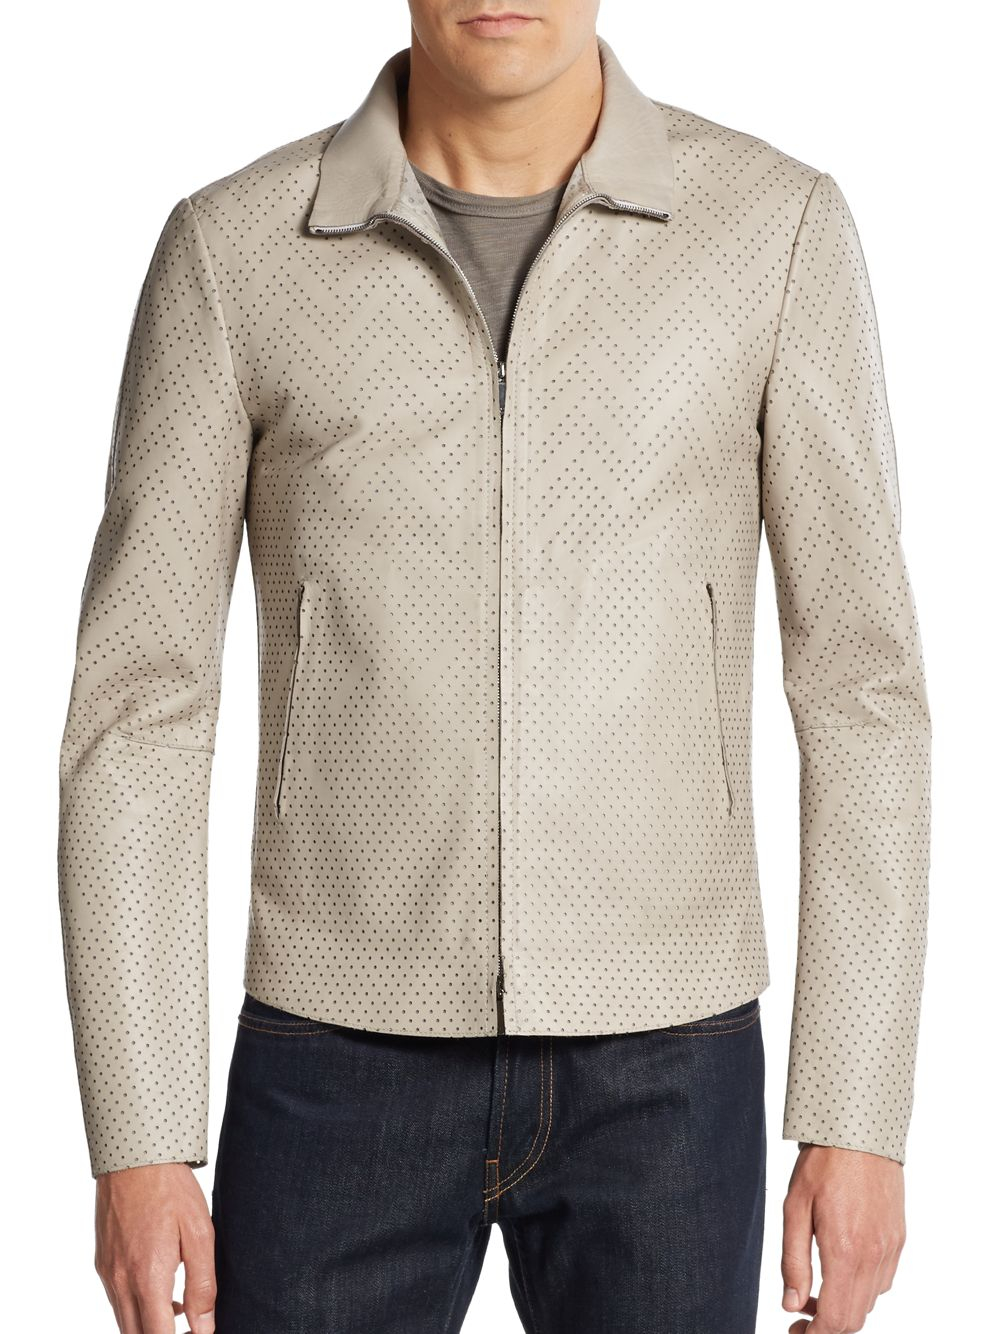 Emporio armani Perforated Leather Jacket in Beige for Men (sand) | Lyst